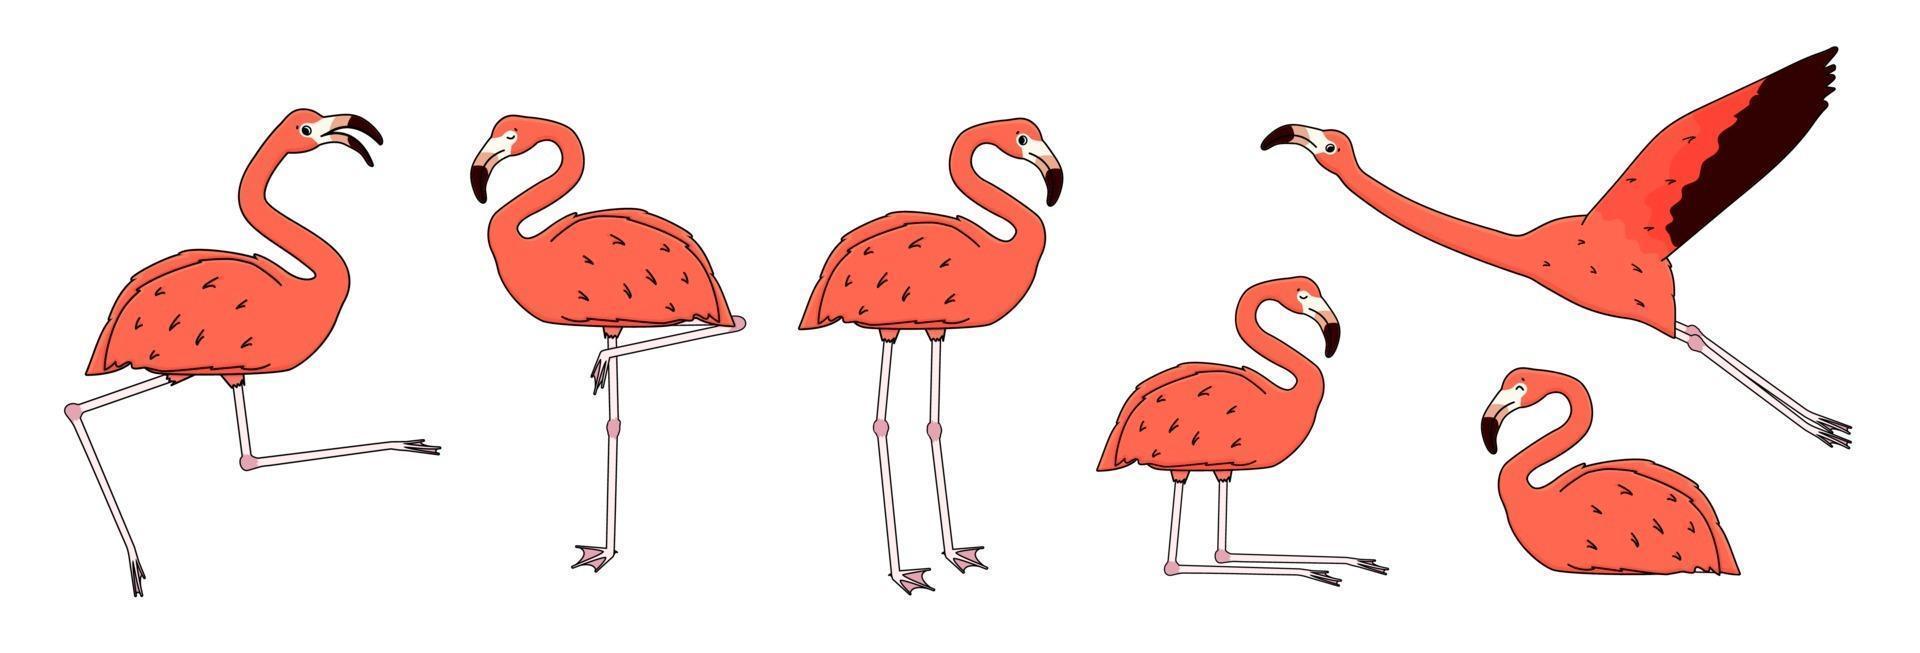 Set of Vector outline cartoon pink peach flamingos isolated on white background. Doodle animal is active, dancing, flies, rejoices, sleeps, rests, relaxes, dreams, walks. Different poses illustration